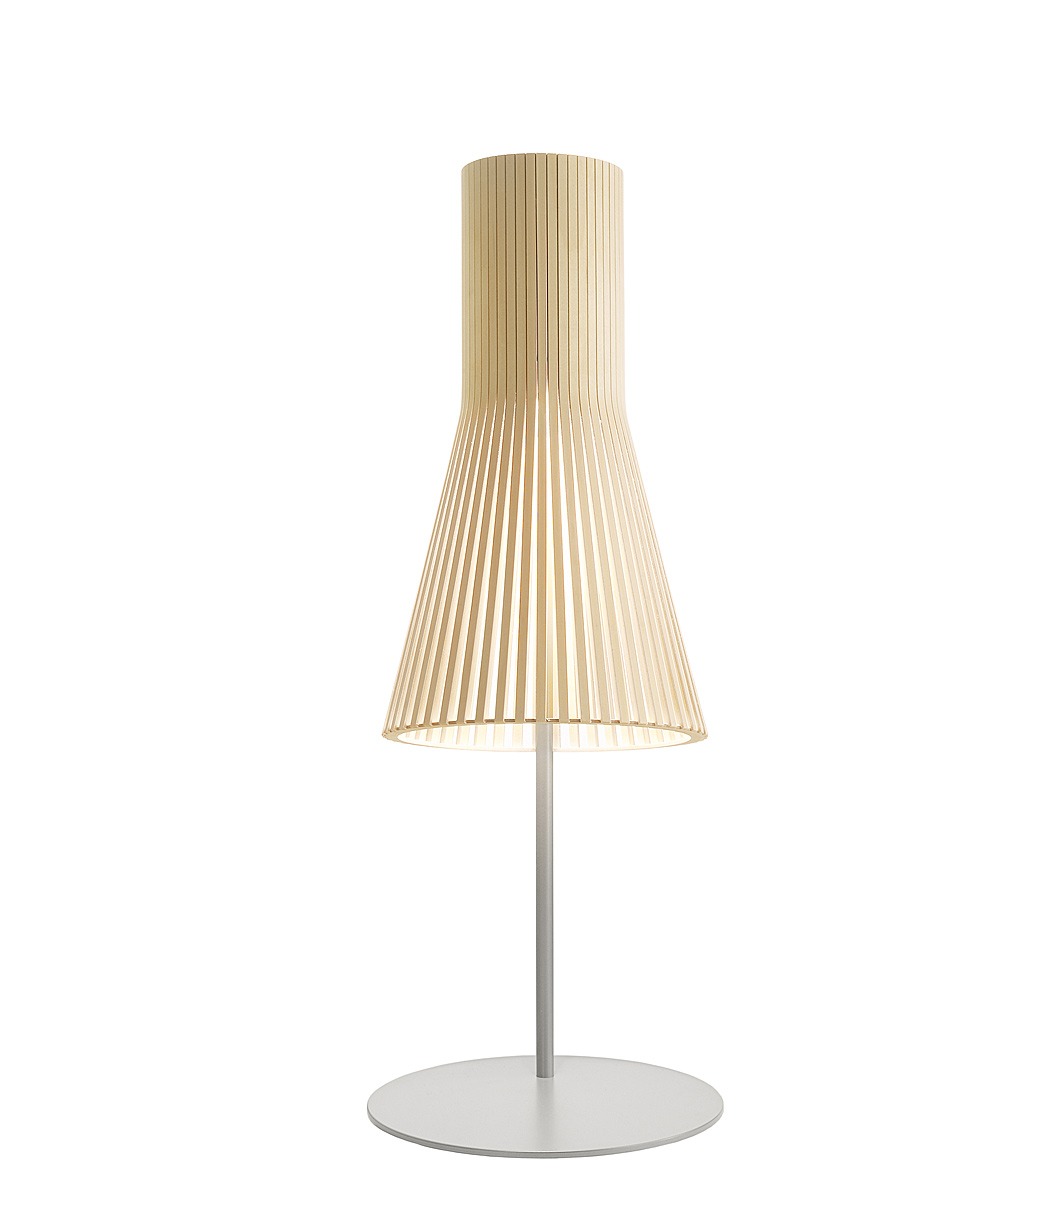 Secto 4220 table lamp is available in natural birch